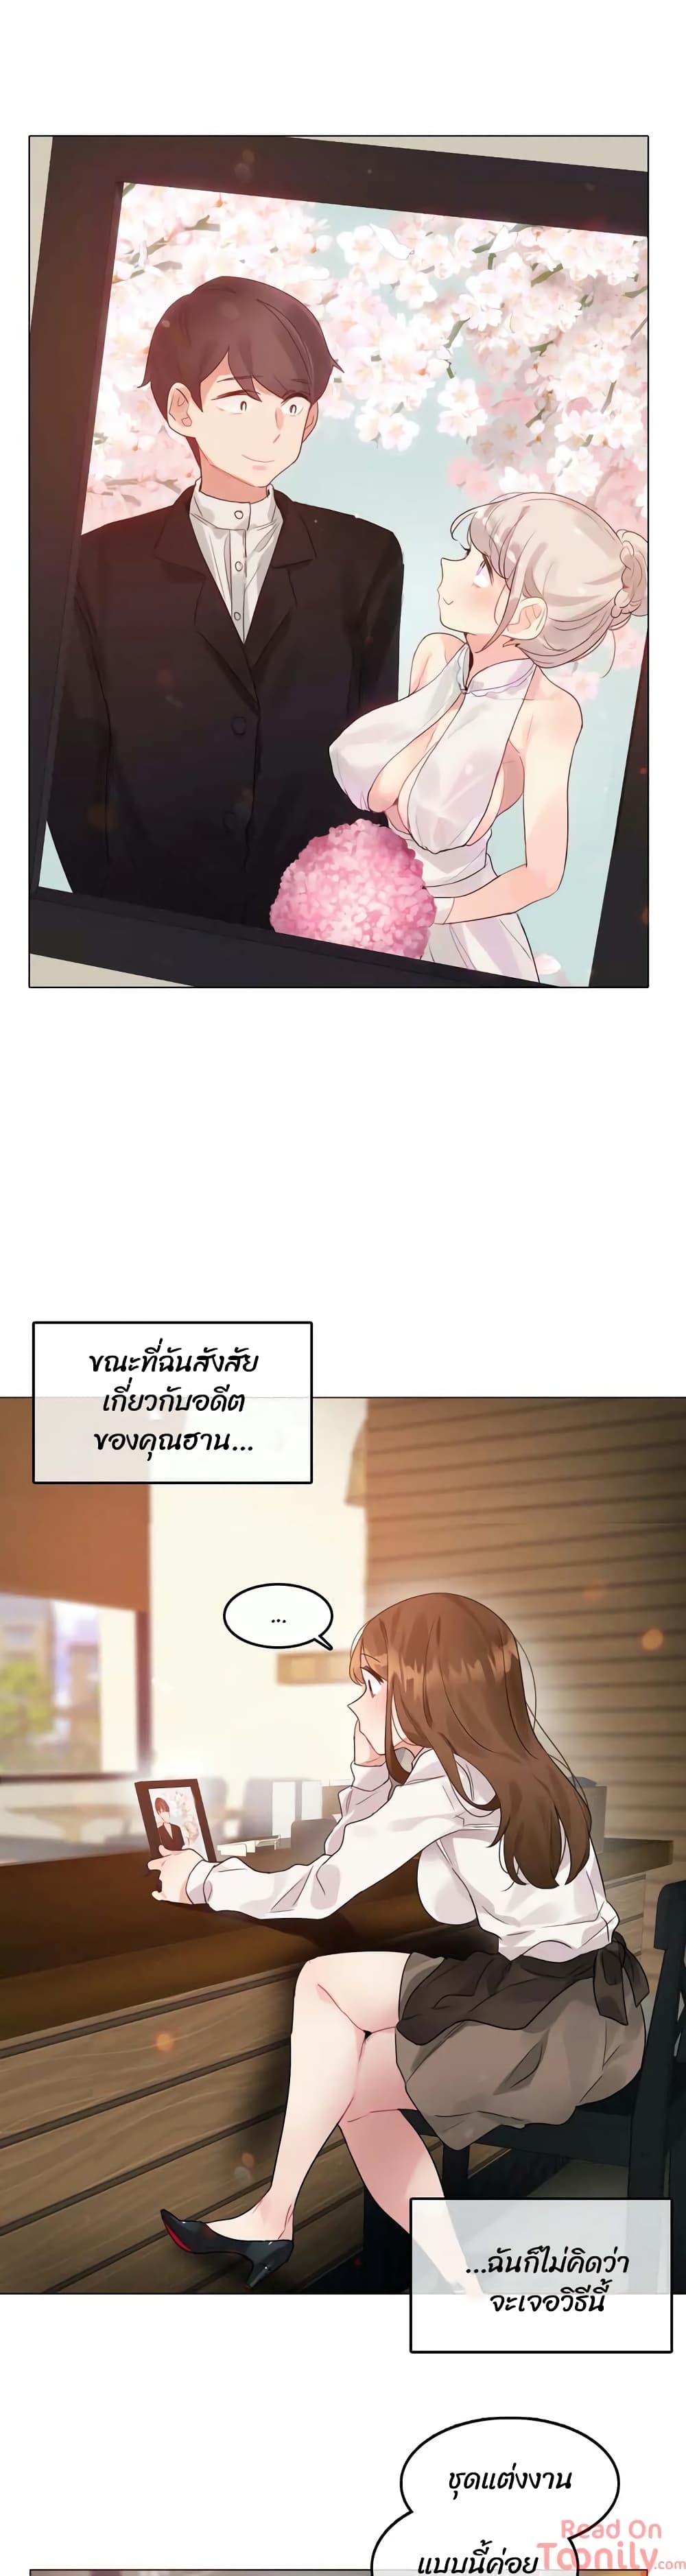 A Pervert's Daily Life 88 (1)